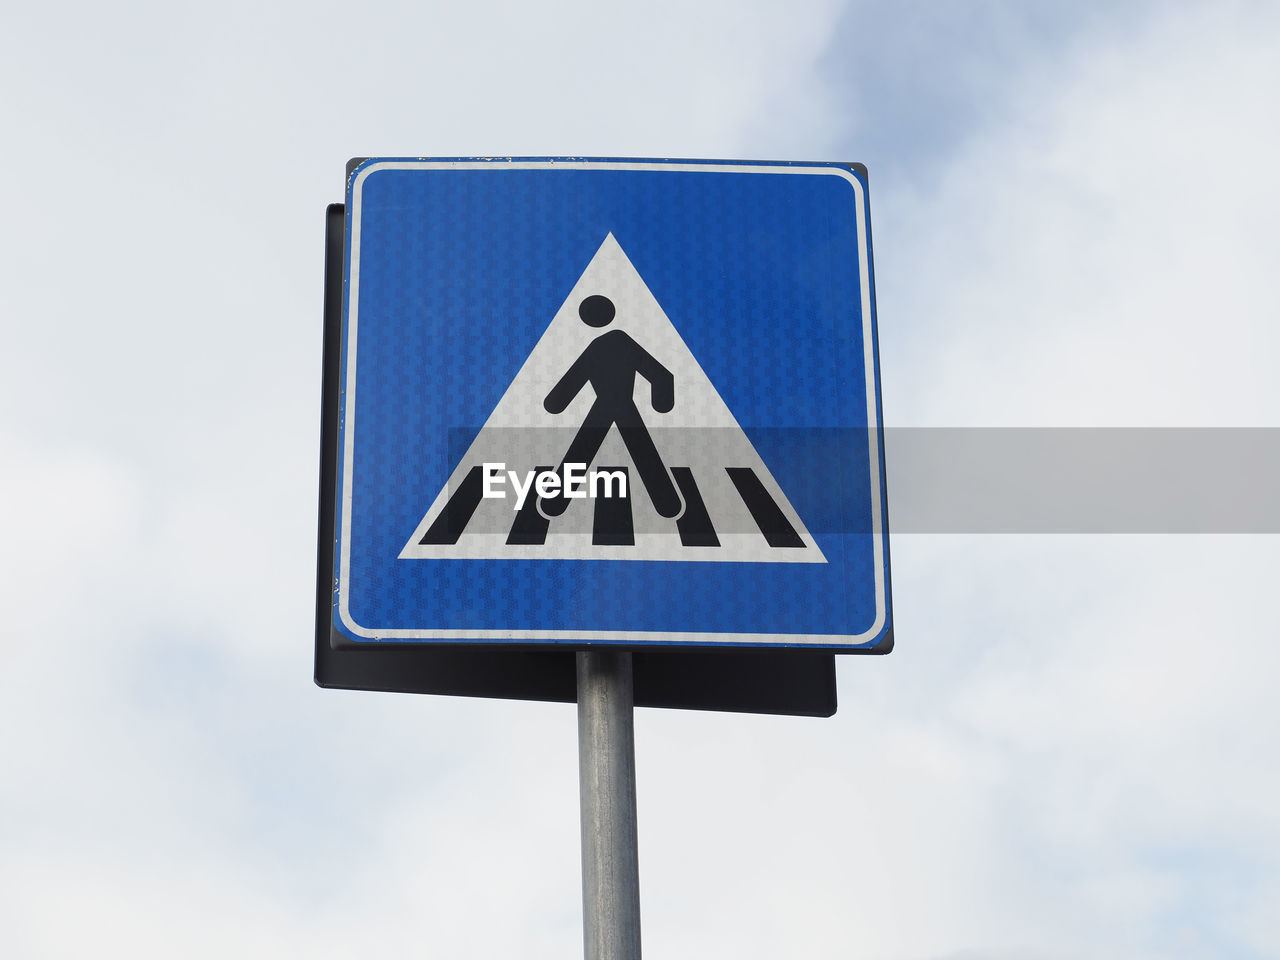 sign, communication, road, road sign, street sign, traffic sign, signage, blue, guidance, symbol, sky, warning sign, no people, cloud, representation, shape, triangle shape, transportation, nature, day, human representation, outdoors, pole, information sign, lane, low angle view, arrow symbol